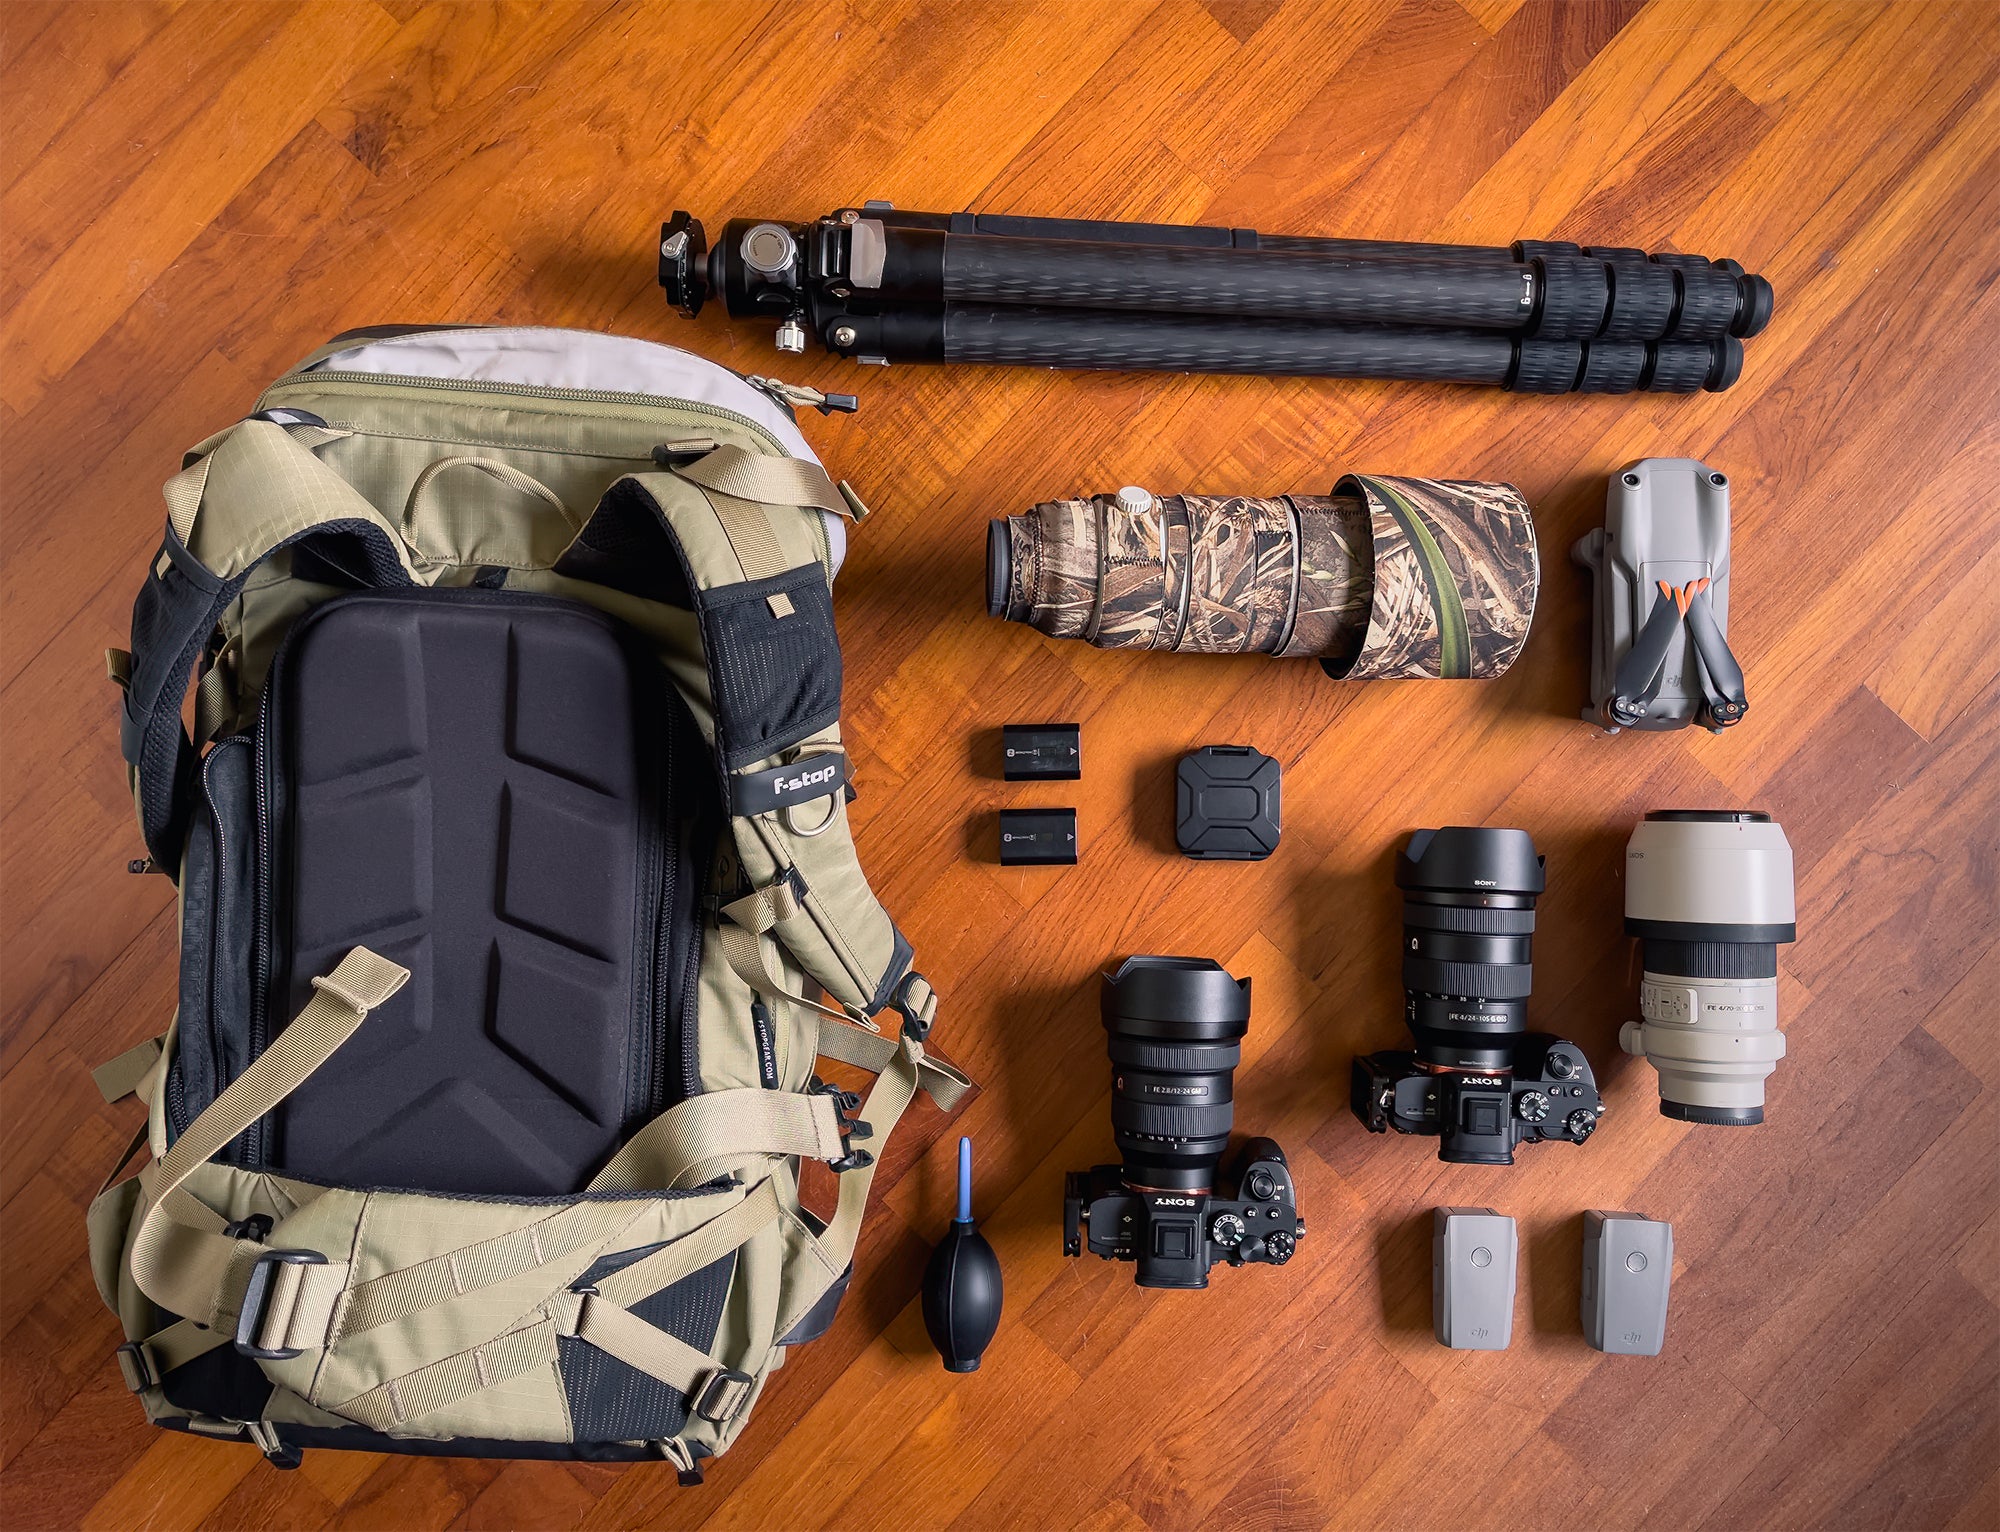 Claudio Bordin's gear for landscape and nature photography